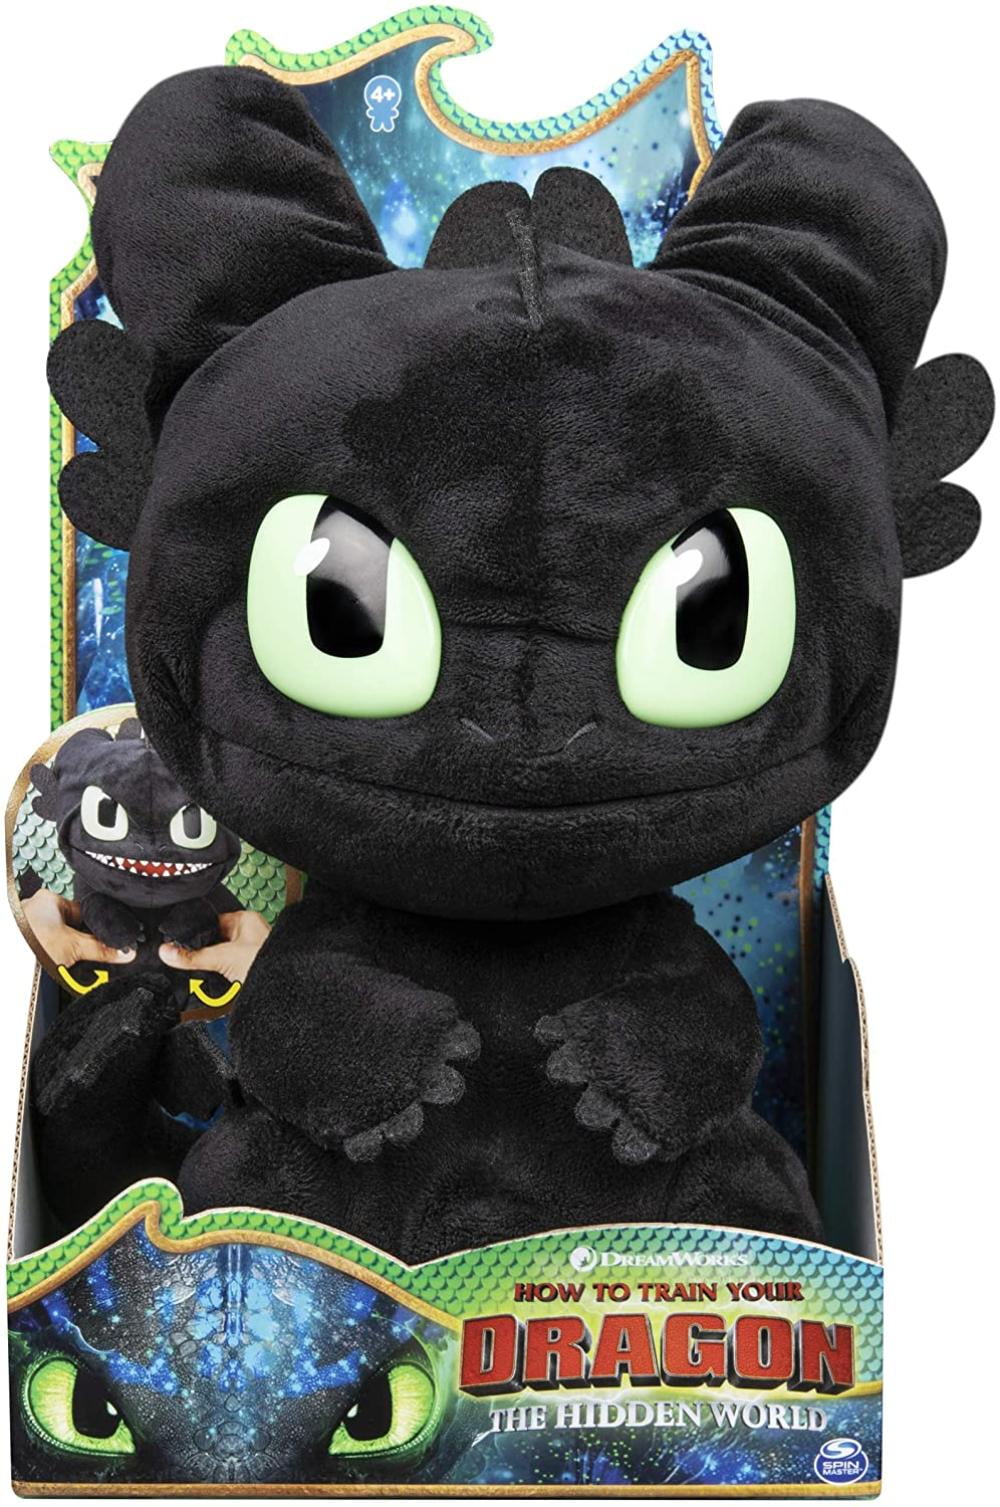 DreamWorks Dragons Squeeze Growl Toothless 10inch Plush Dragon With Sounds for for sale online 